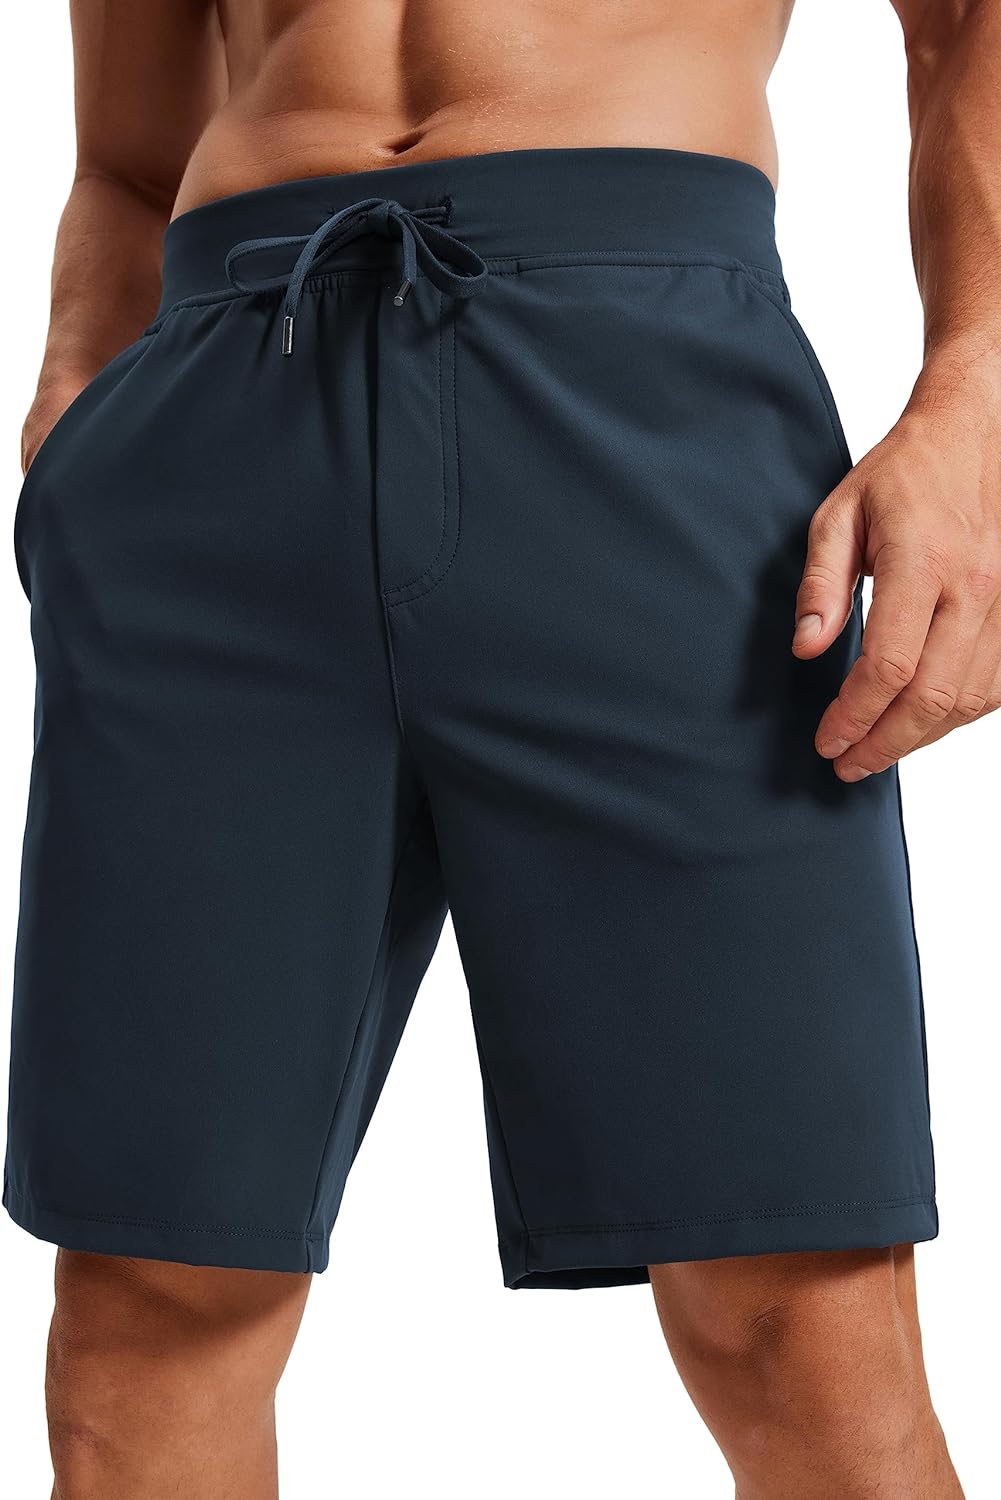 CRZ YOGA Men’s Four-Way Stretch Workout Shorts – The Perfect Athletic Shorts for Versatile Performance